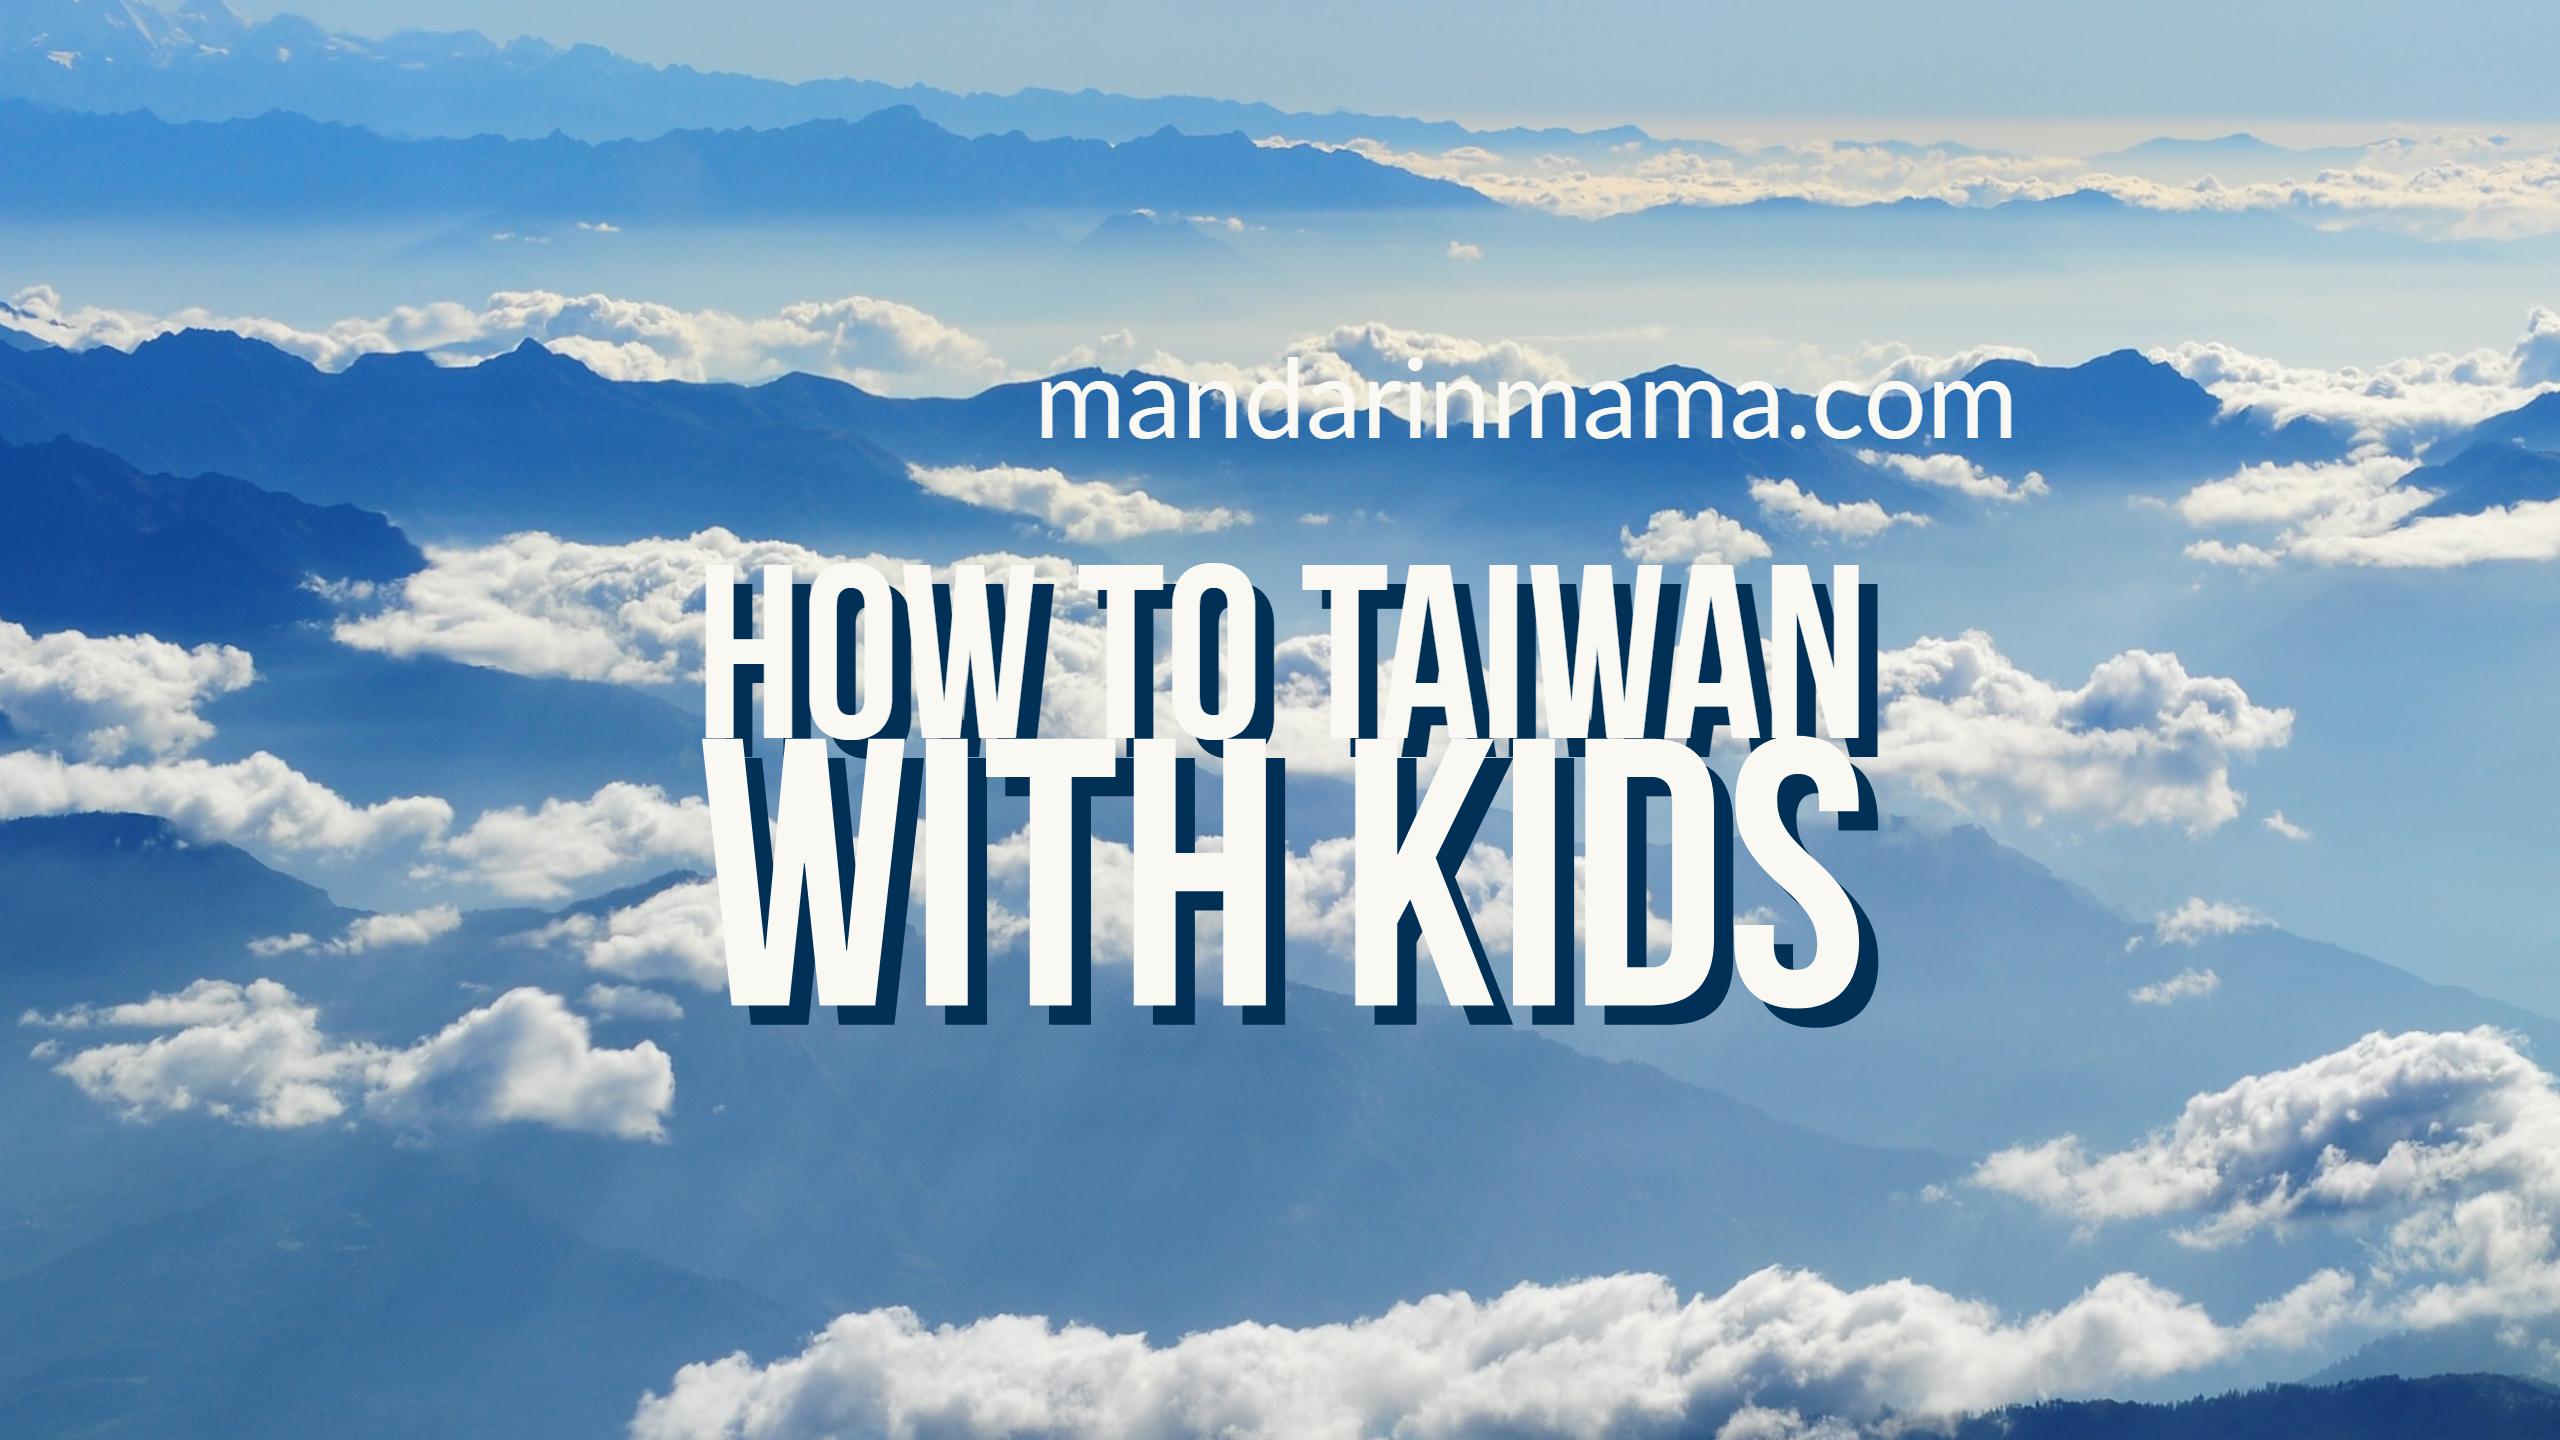 How to Taiwan with Kids